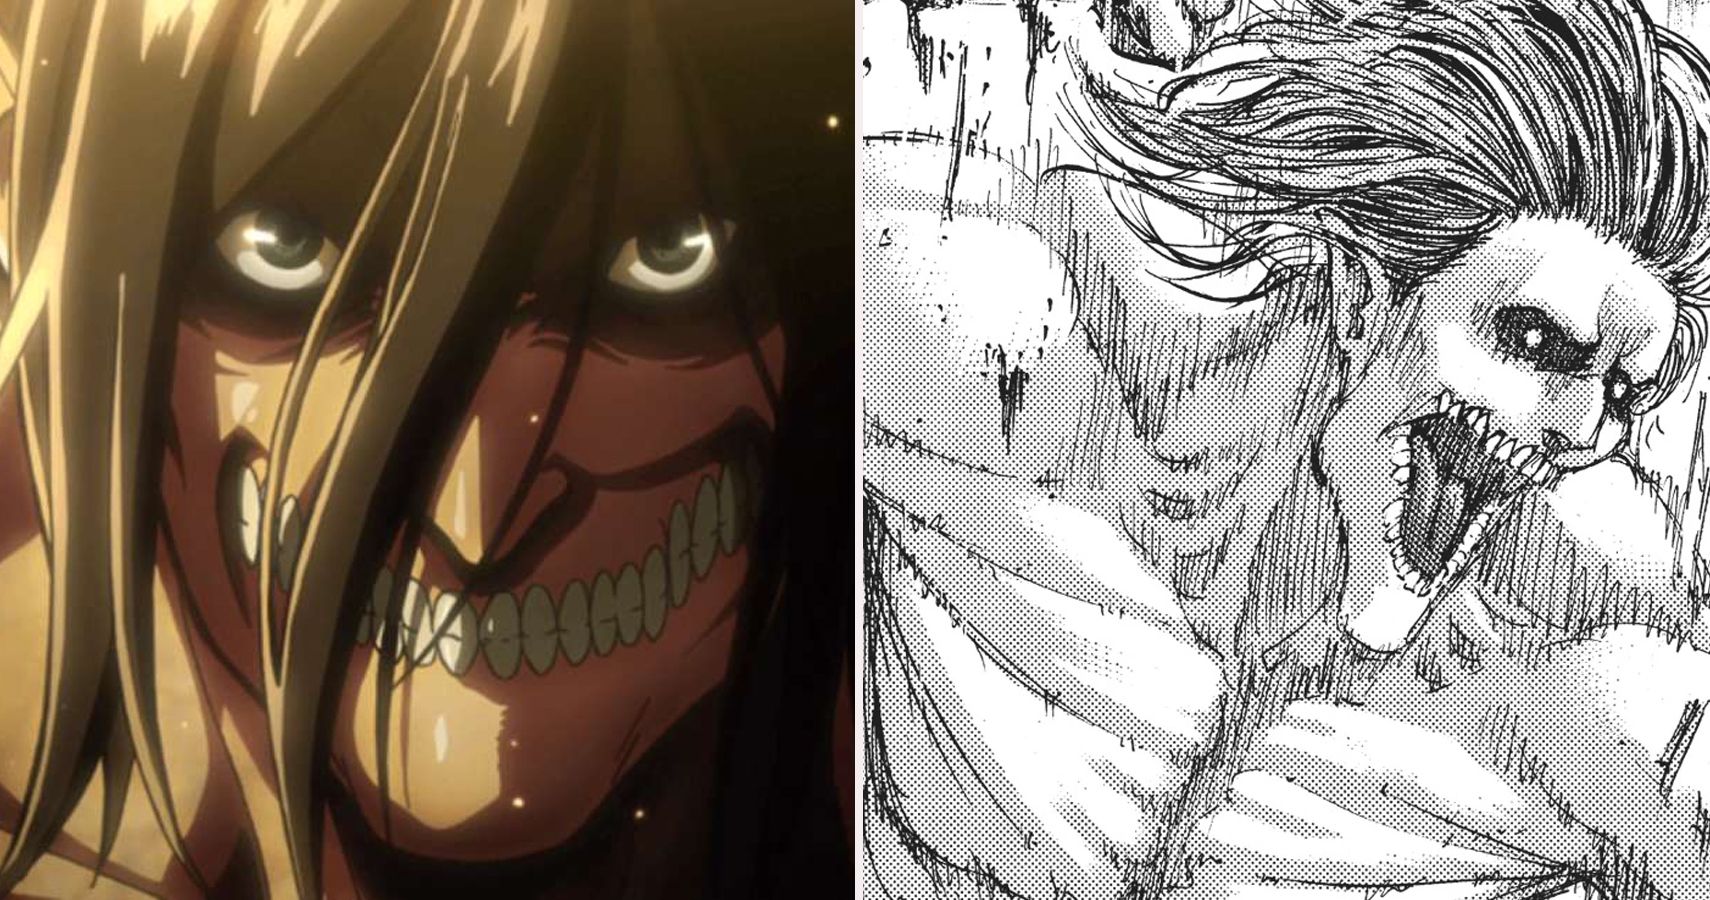 Attack On Titan 10 Differences Between The Anime The Manga Discover and download free attack on titan png images on pngitem. attack on titan 10 differences between